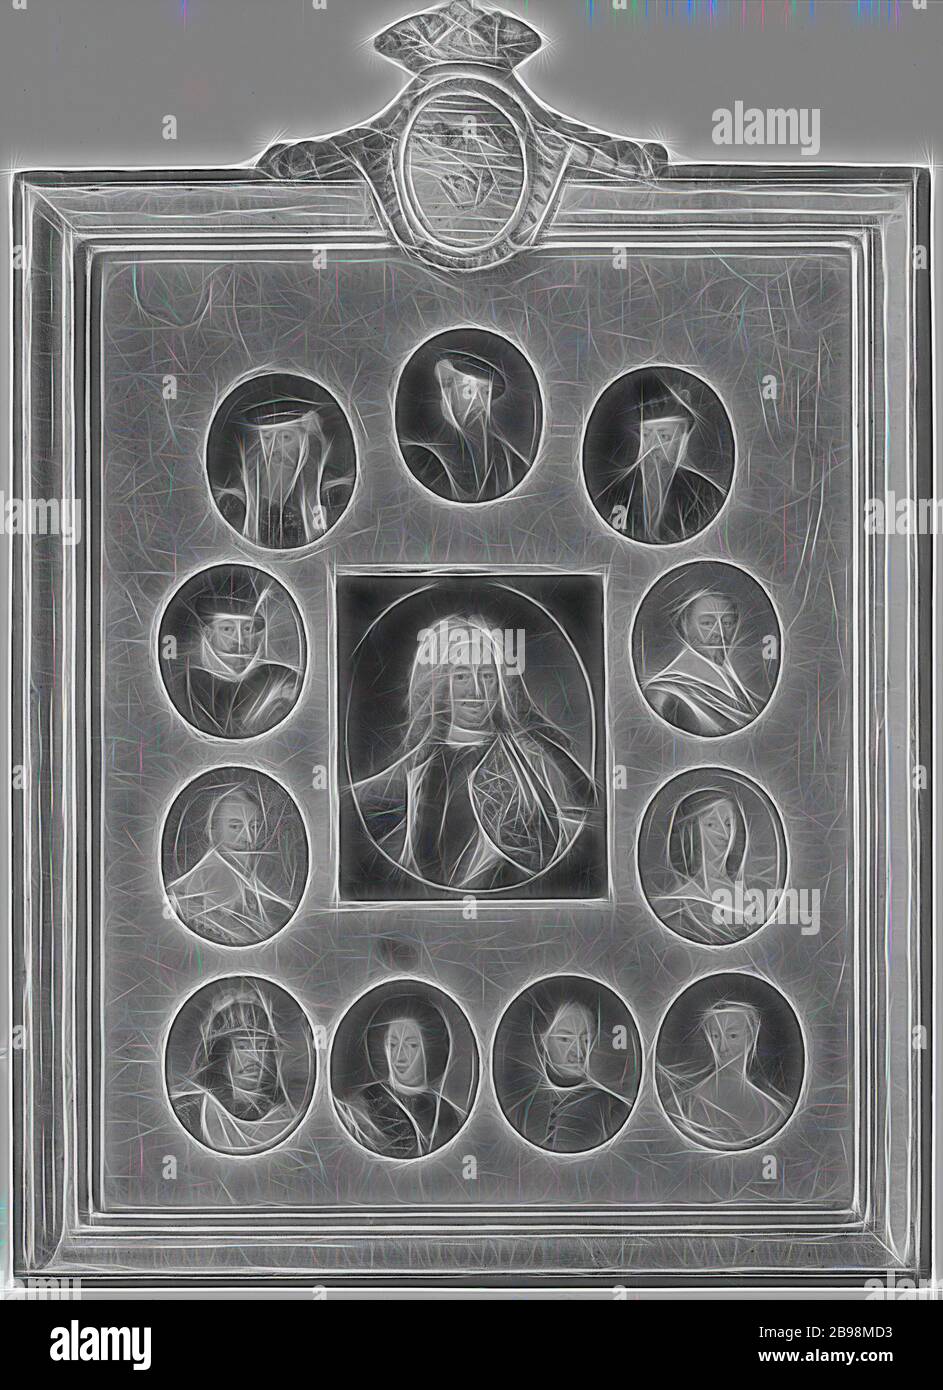 Attributed to Niclas Lafrensen d.ä, Kung Fredrik I, Queen Ulrika Eleonora dy, King Karl XI, King Karl XII, King Karl X Gustav, King Gustav I, King Karl IX, King Johan III, King Sigismund, King Erik XIV, King, Gustav II Adolf and Queen Kristina, Swedish governors from Gustav I to Fredrik I, 12 people, painting, Frederick I of Sweden, Watercolor and gouache on parchment, Height, 48.5 cm (19 inches), Width, 35 cm (13.7 inches), Inscription, Grh 462 REGENTLÄDD GUSTAF I-FREDRIK I By N. Lafrensen d., Reimagined by Gibon, design of warm cheerful glowing of brightness and light rays radiance. Classic Stock Photo